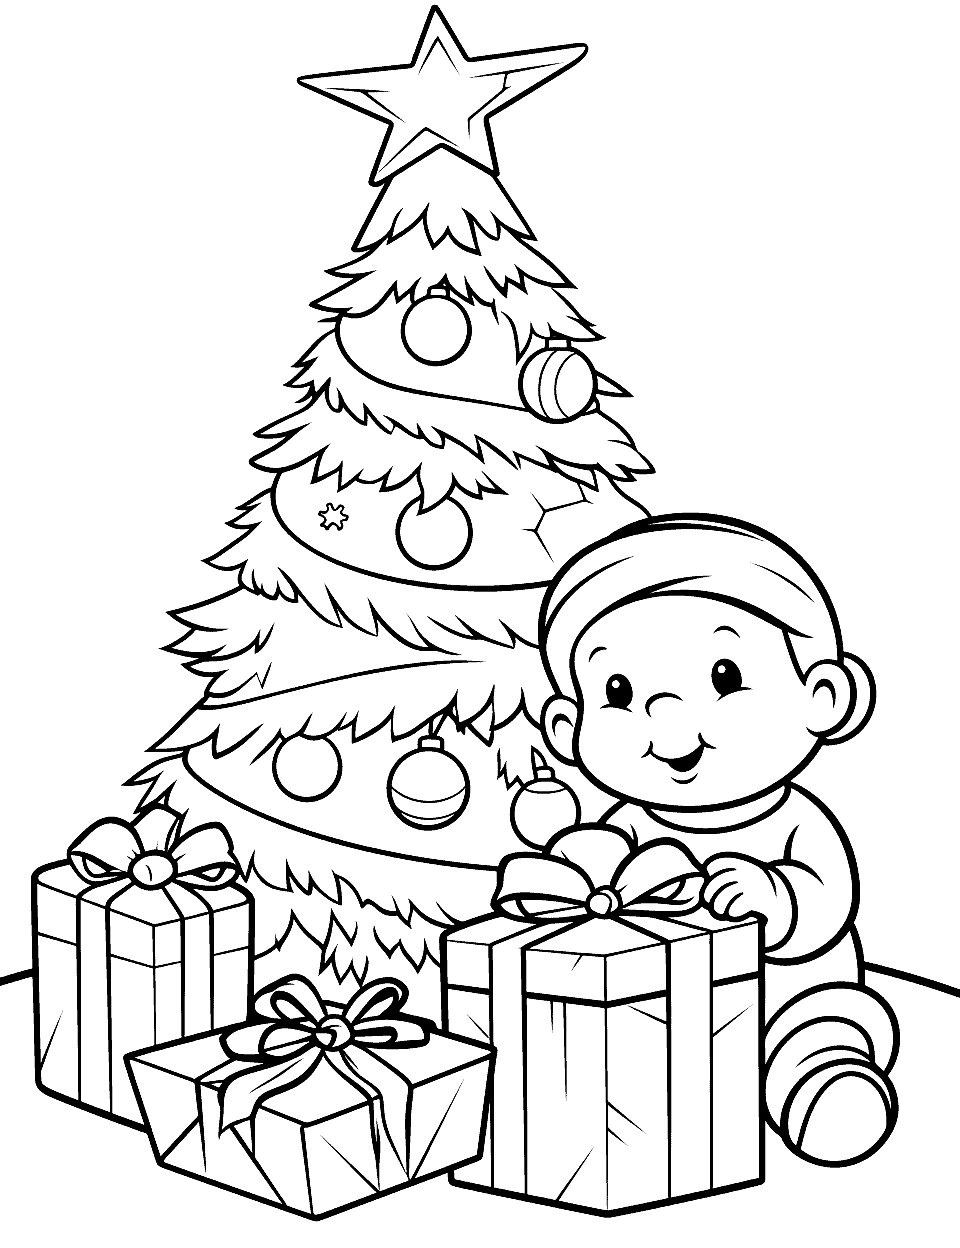 Baby's First Christmas Coloring Page - A coloring page commemorating a baby’s first Christmas with presents and a Christmas tree.